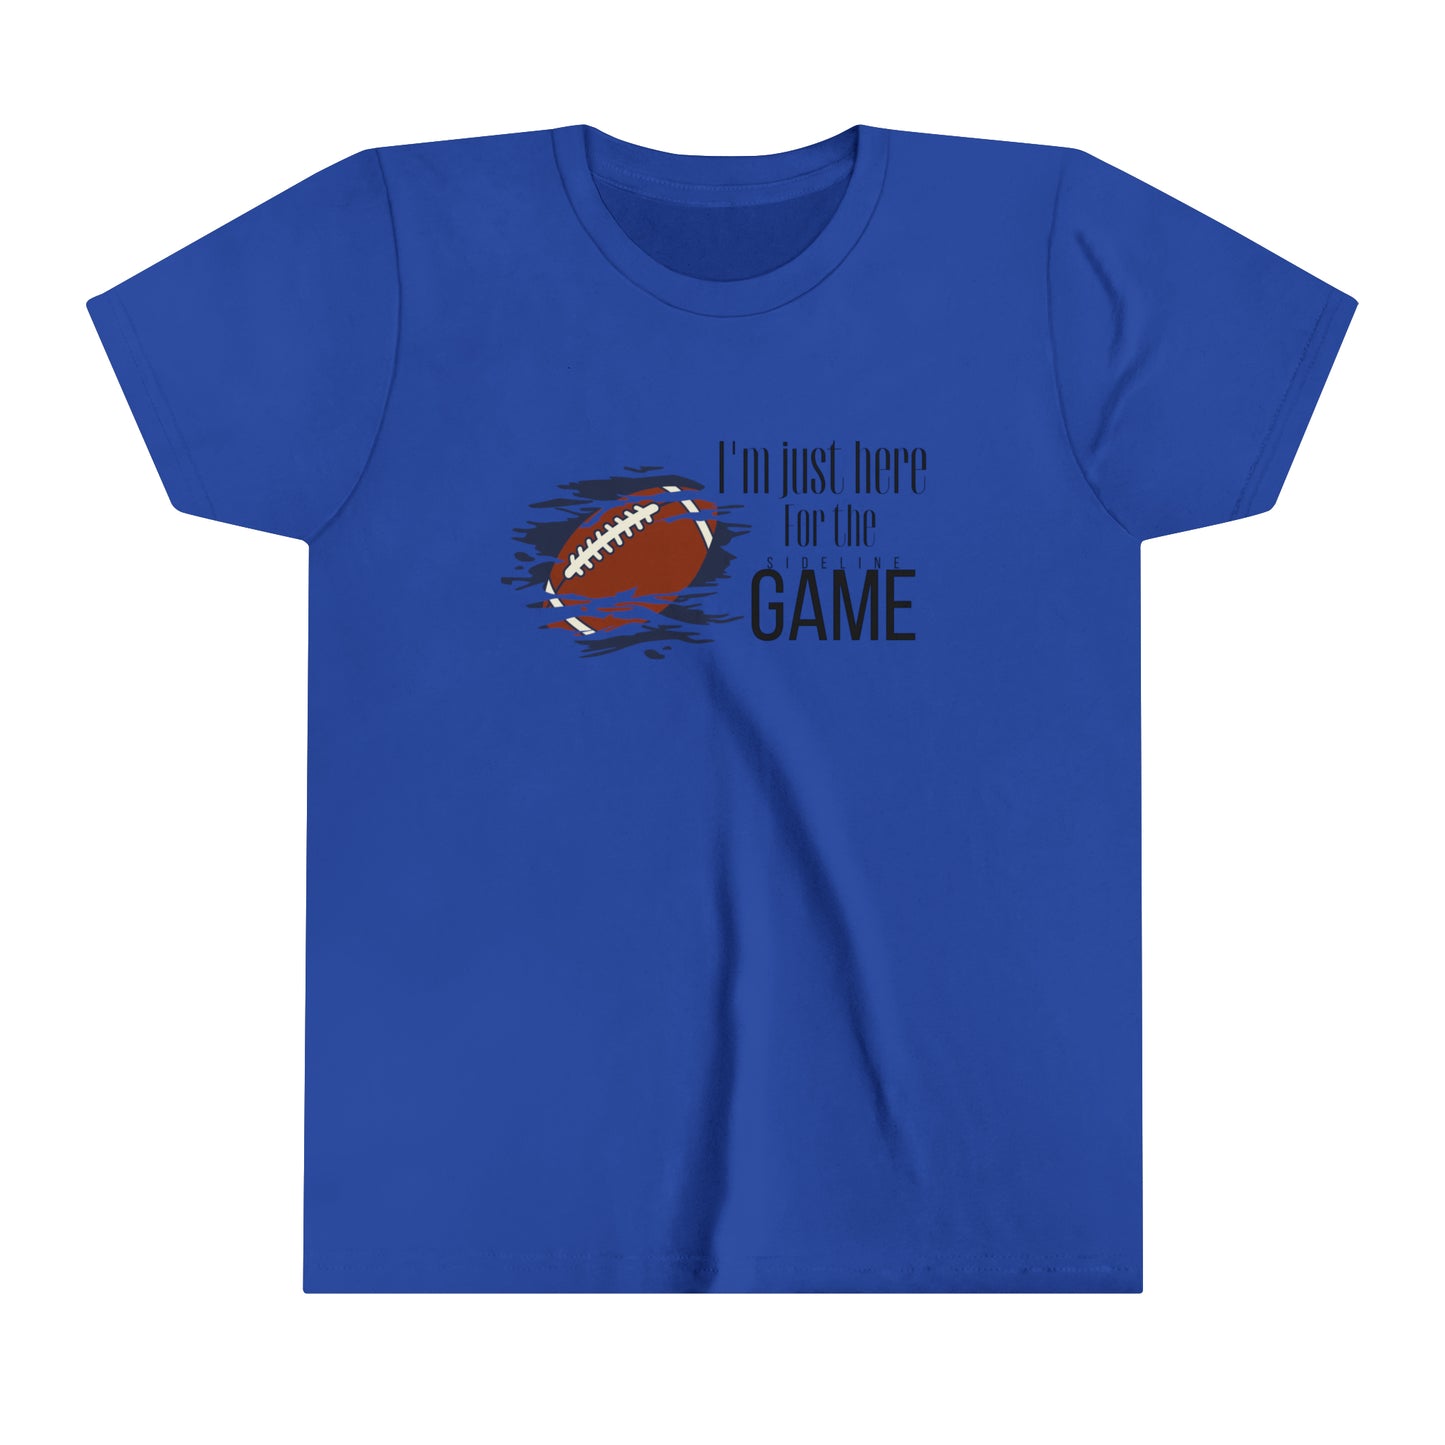 I'm just here for the sideline game kids t shirt